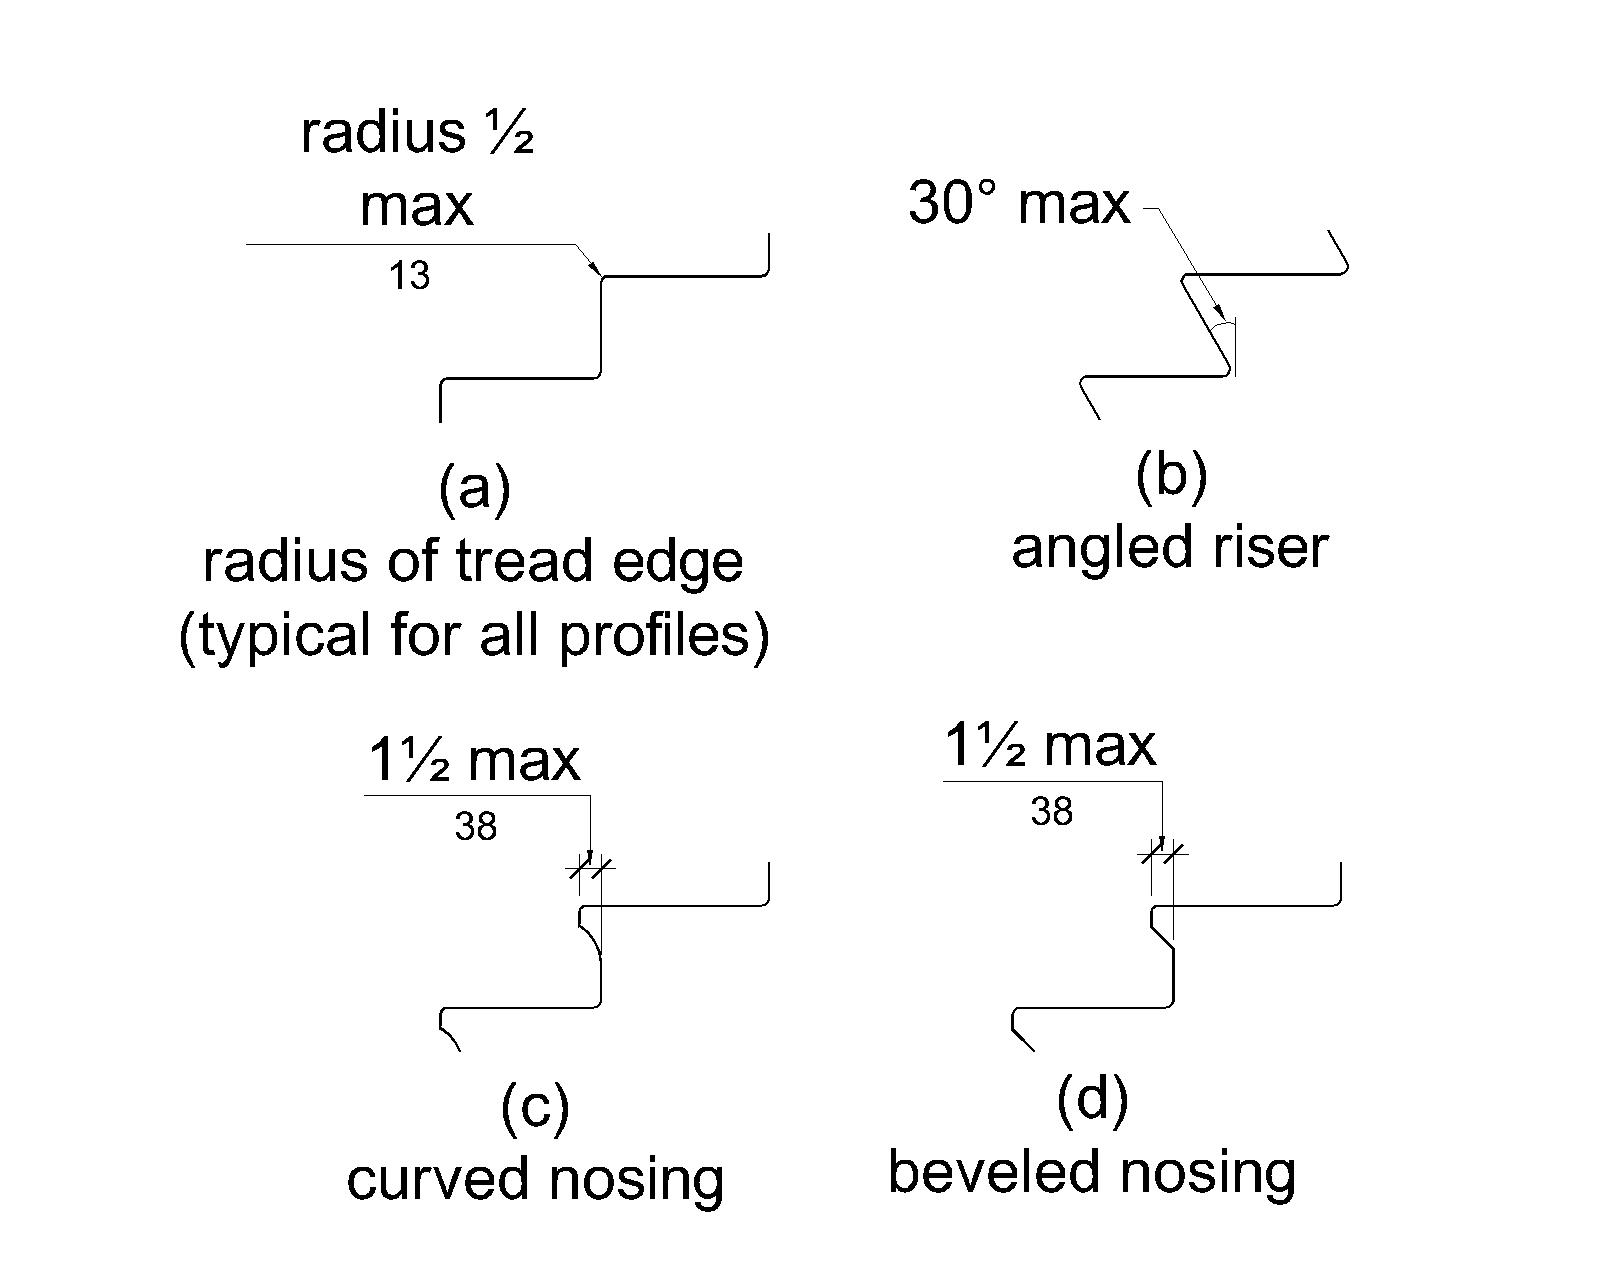 Figure (a) shows vertical risers where the radius of curvature of the leading edge of each tread is ½ inch (13 mm) maximum. Figure (b) shows angled risers. Risers can slope at an angle of 30 degrees maximum from the vertical. Figures (c) and (d) show curved and beveled nosings, respectively. The maximum projection of the nosing is 1½ inches (38 mm) beyond the rear of the tread below.